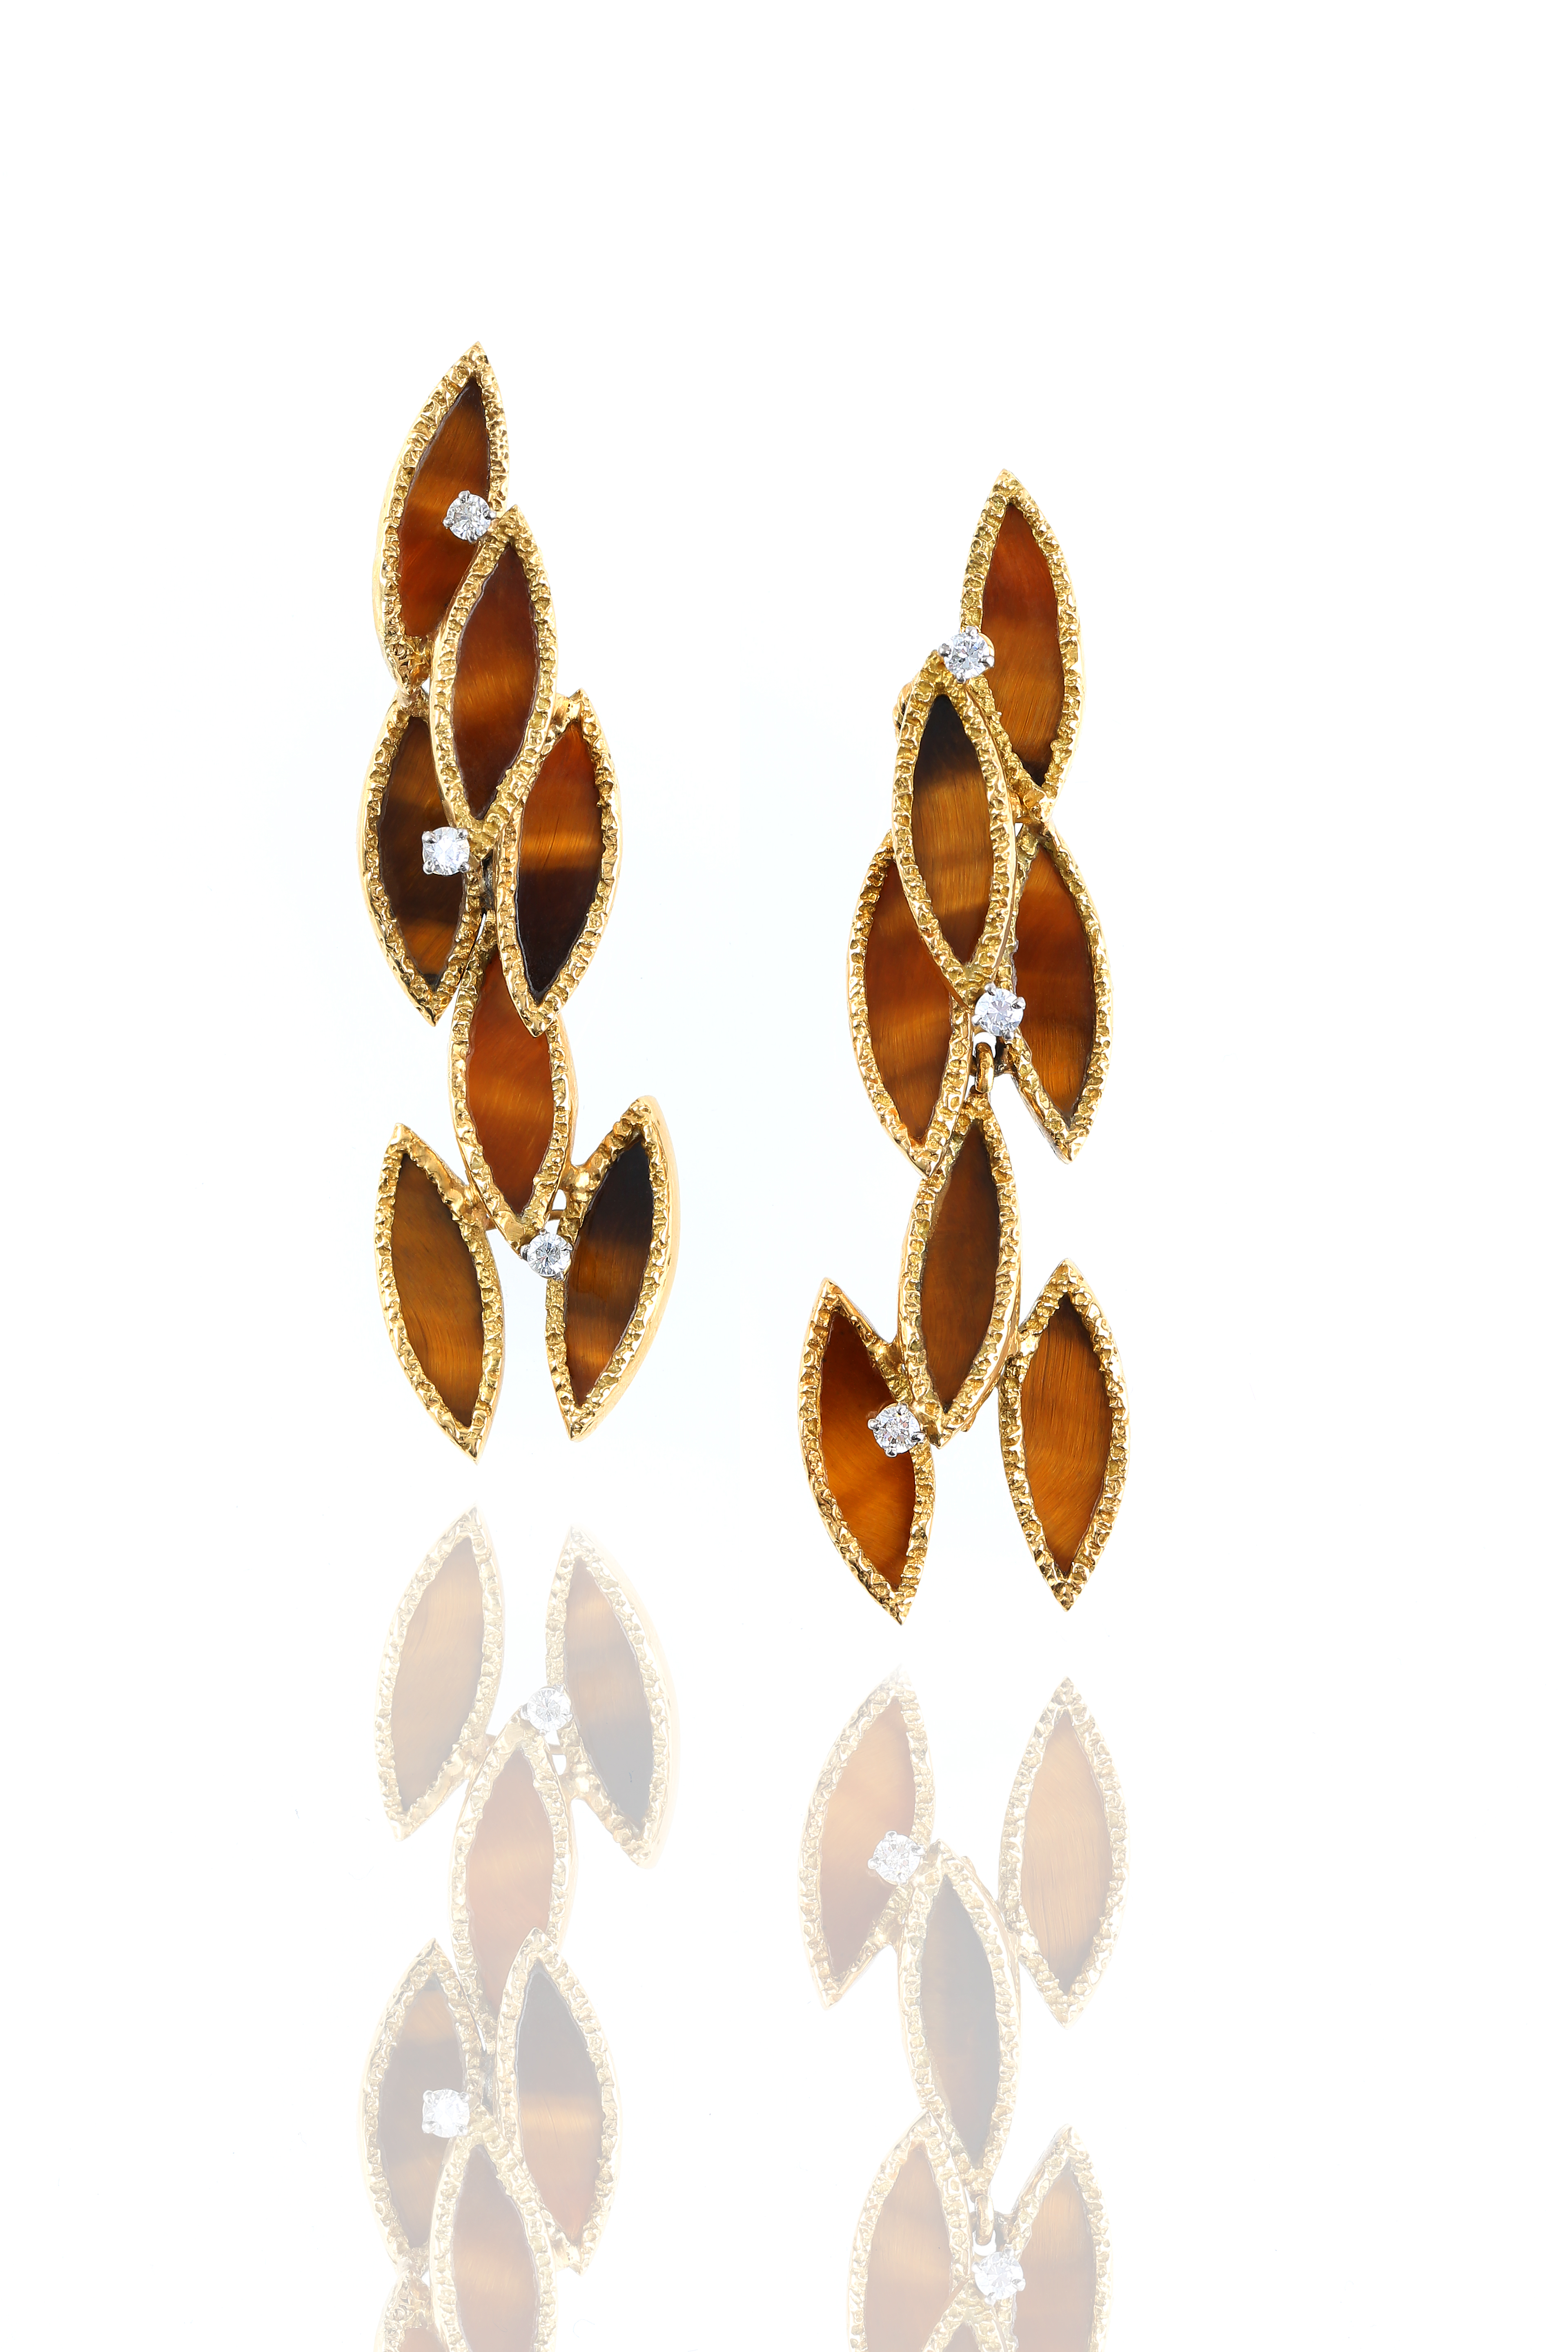 tiger's eye and diamond pendent earrings, by J. Rossi